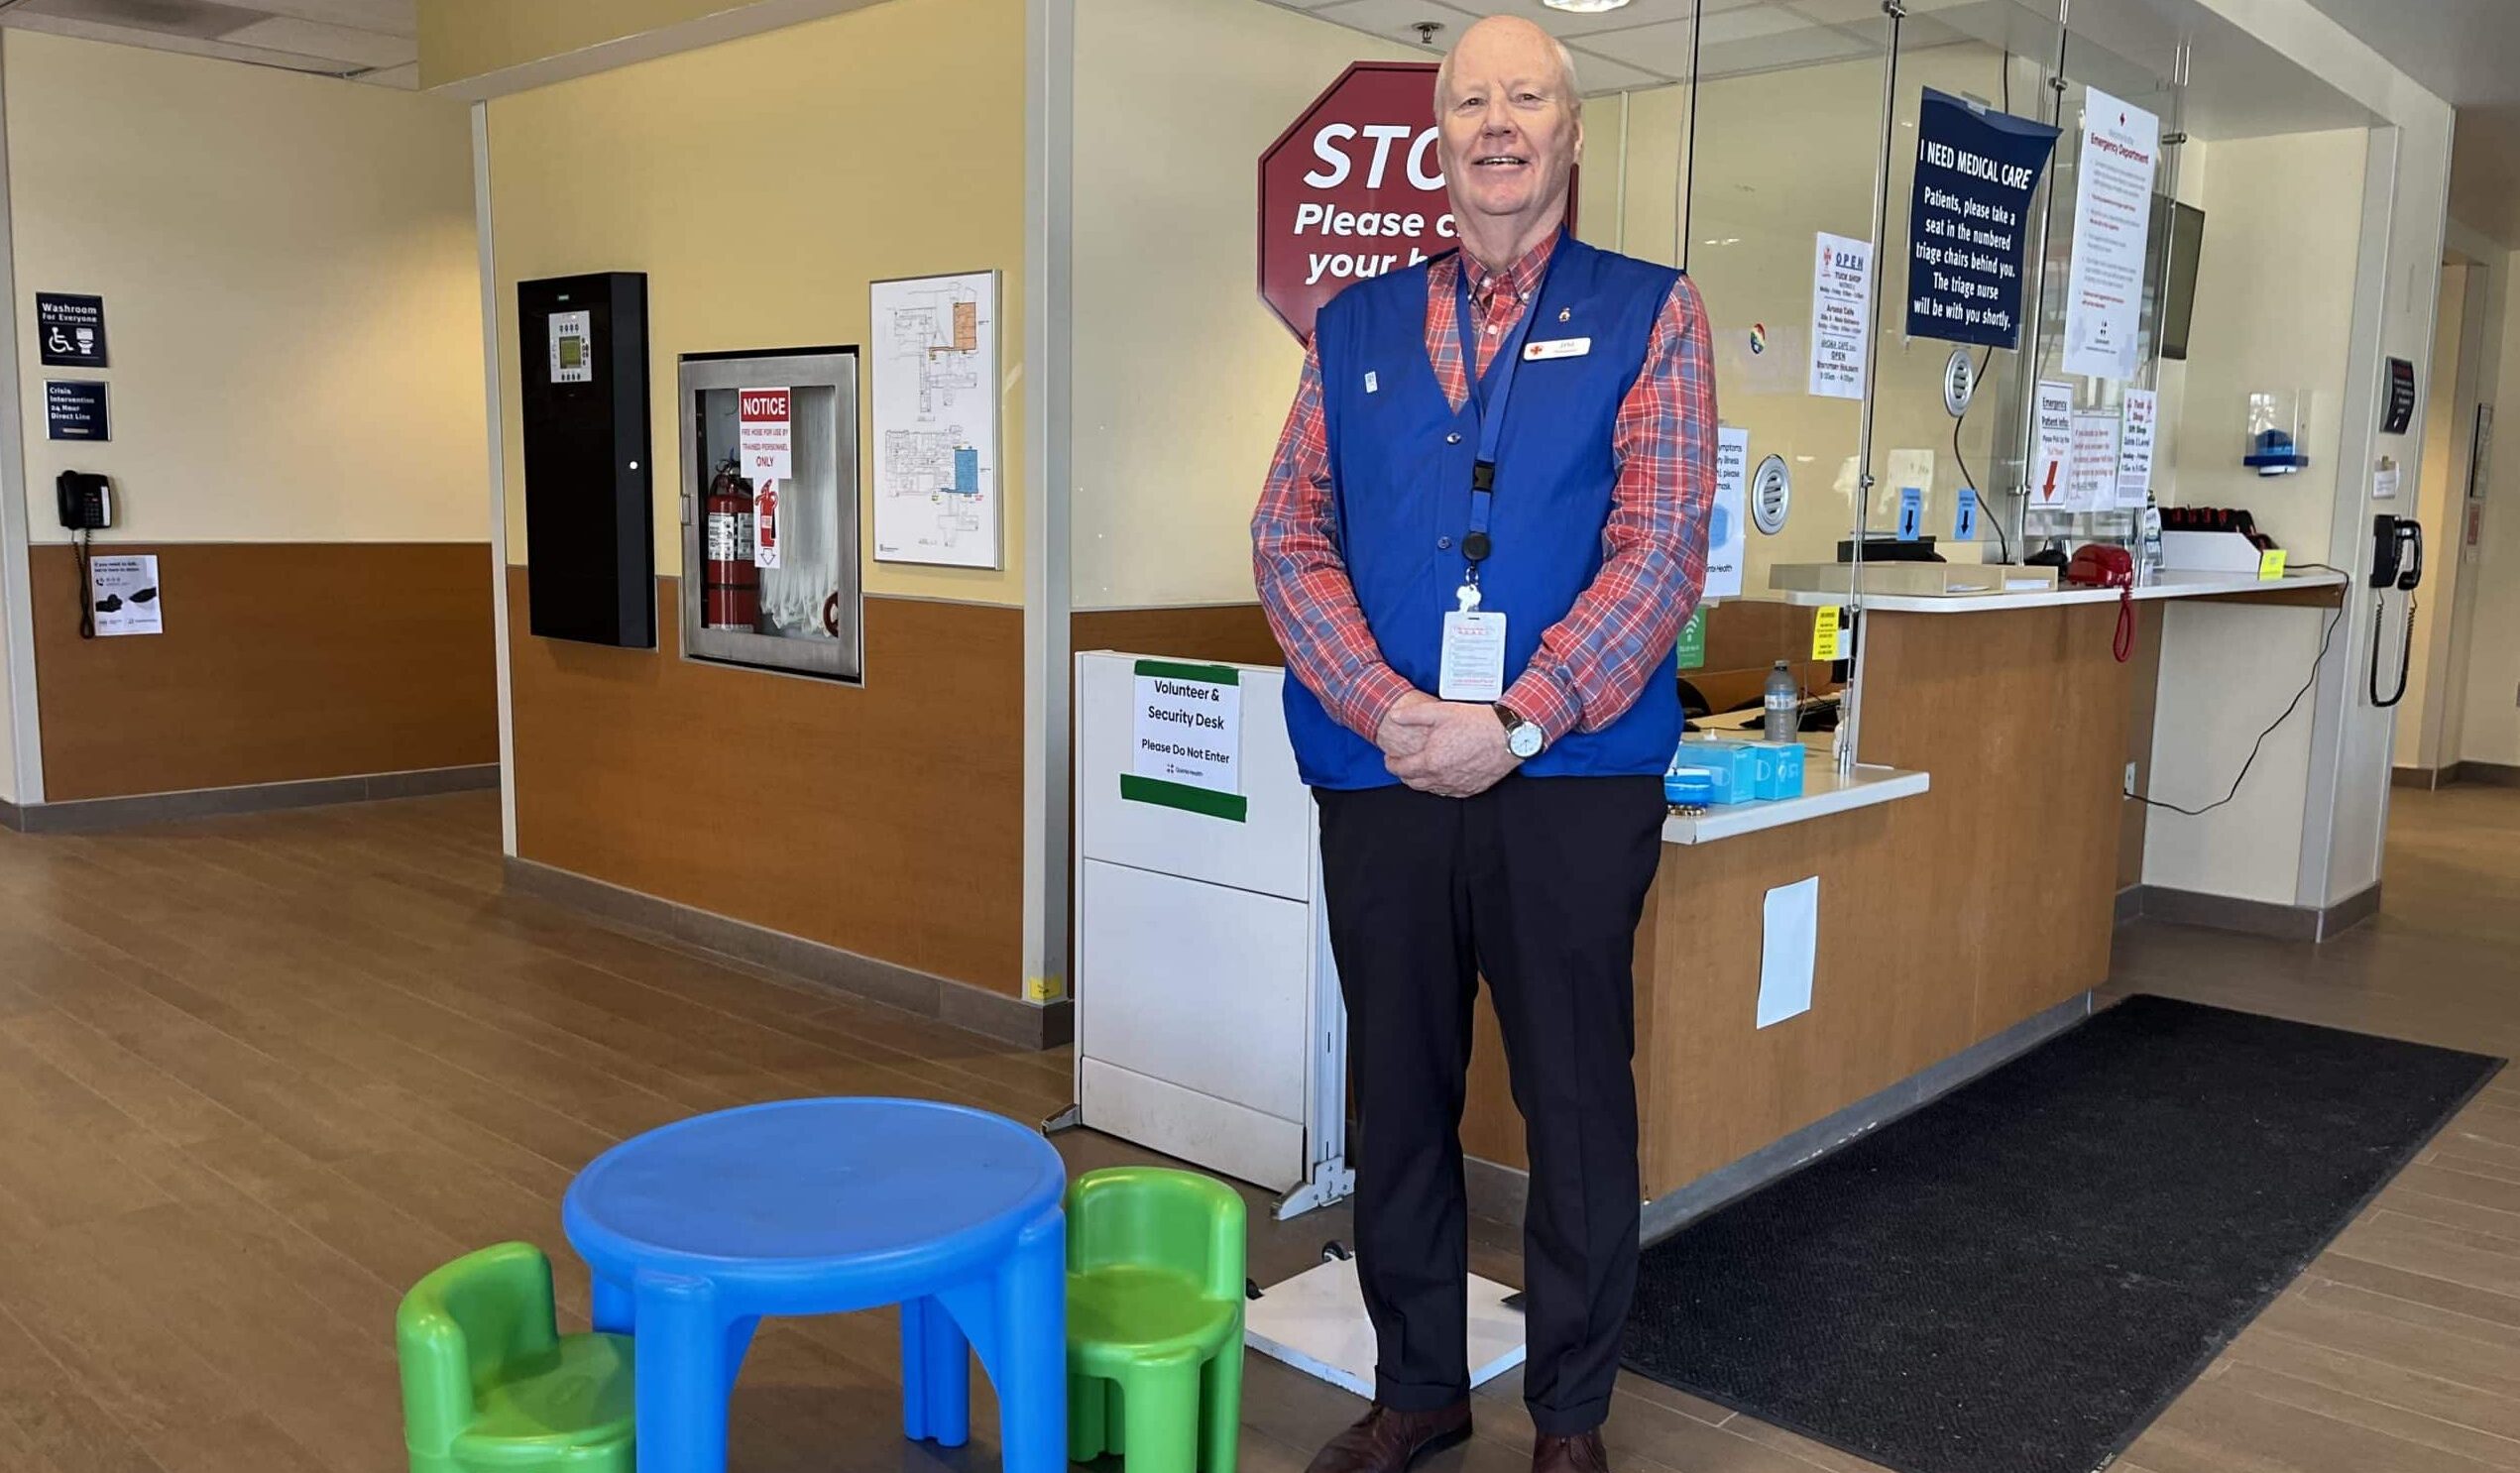 An older man with white hair wearing a blue vest stands beside a plastic children's table and two chairs in the emergency department.